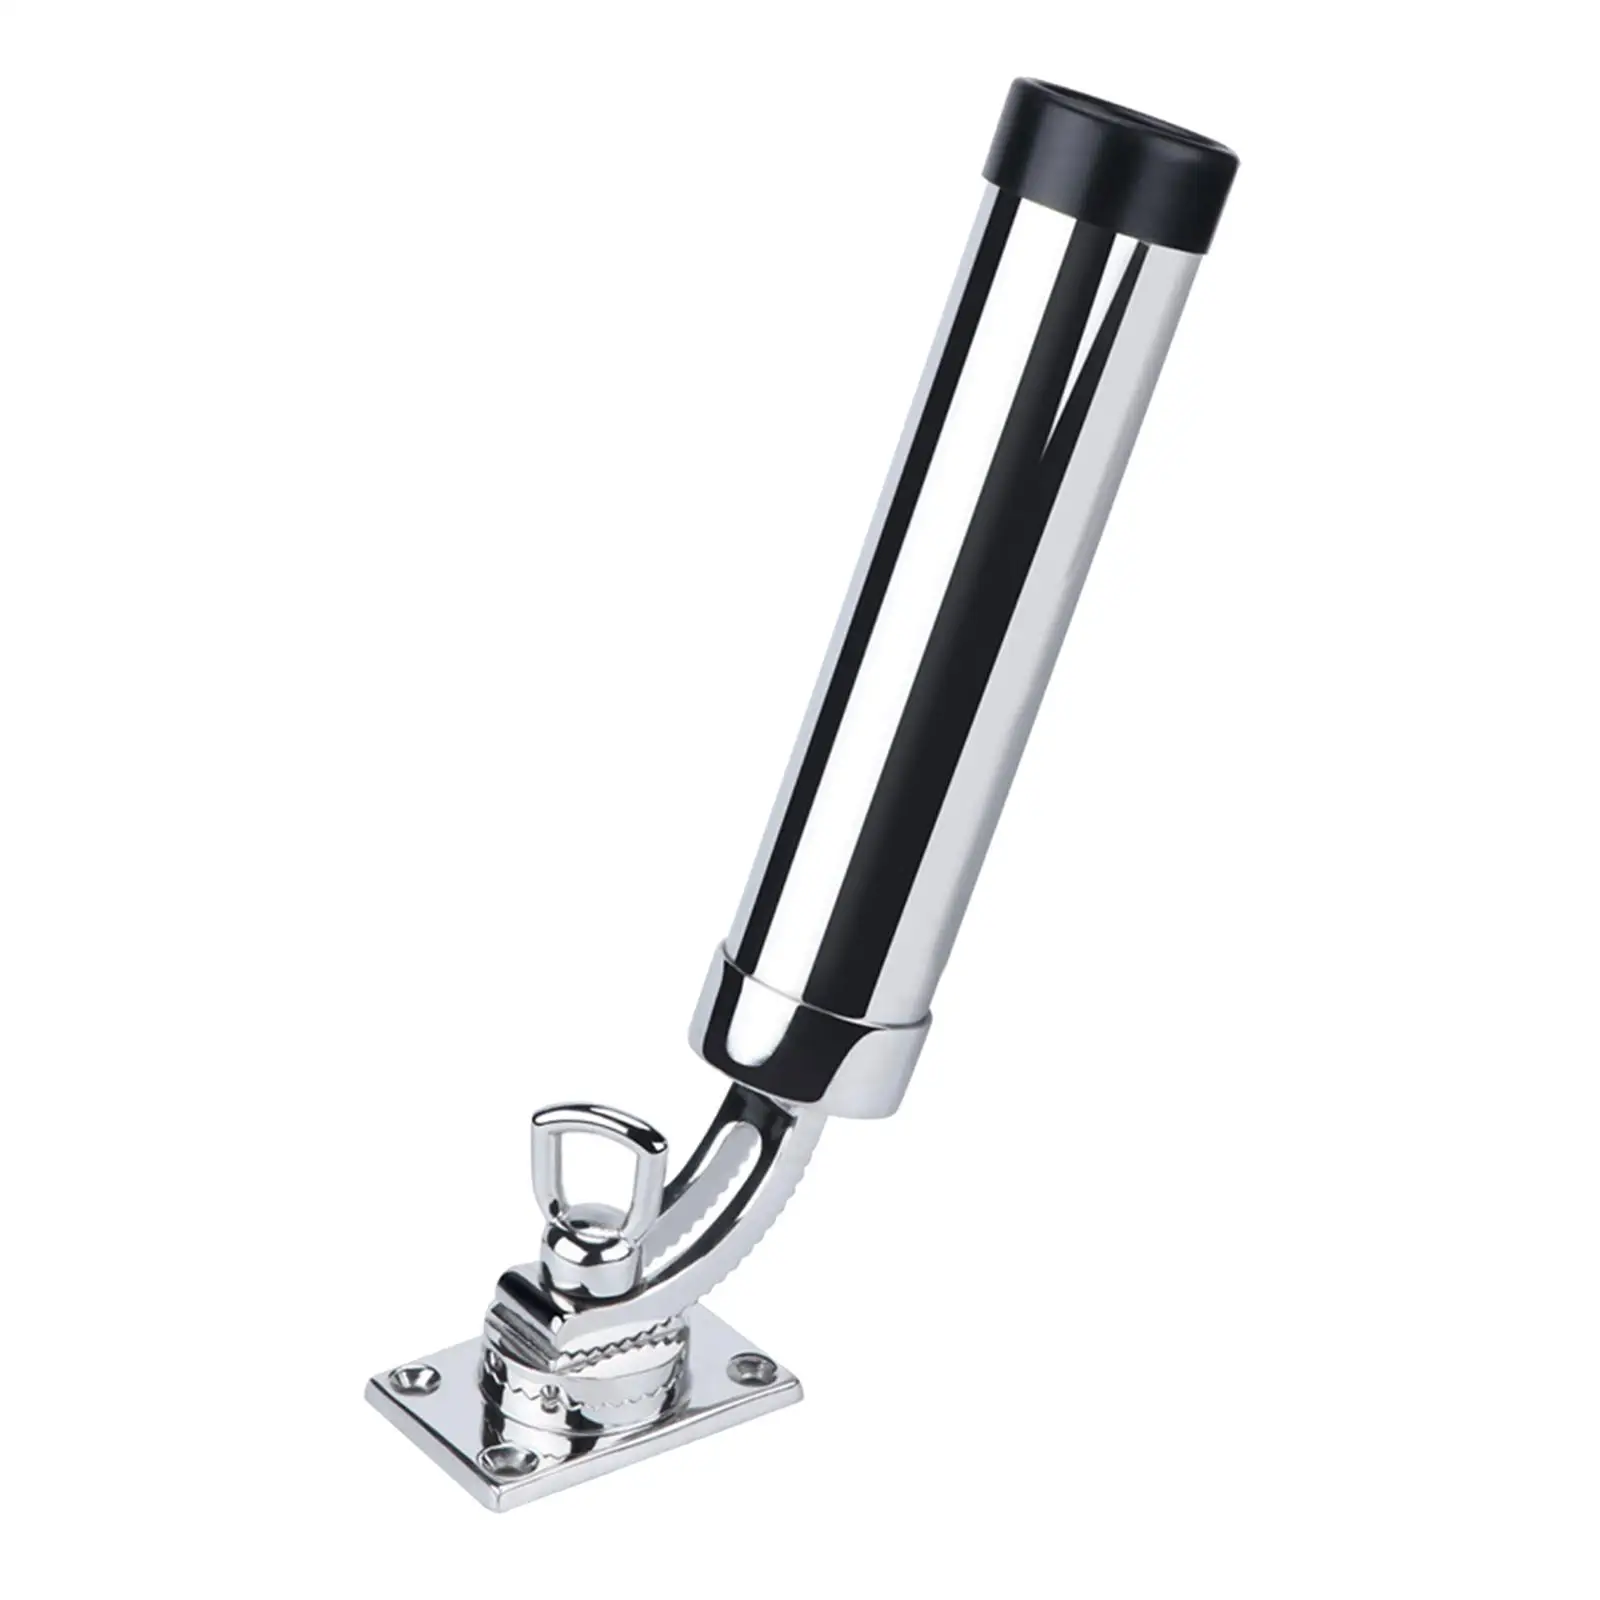 Stainless Steel Fishing Rod Holder Bracket Supporting Accessories Rail Mounting Premium Fishing Pole Holder Rail Mounted Clamp